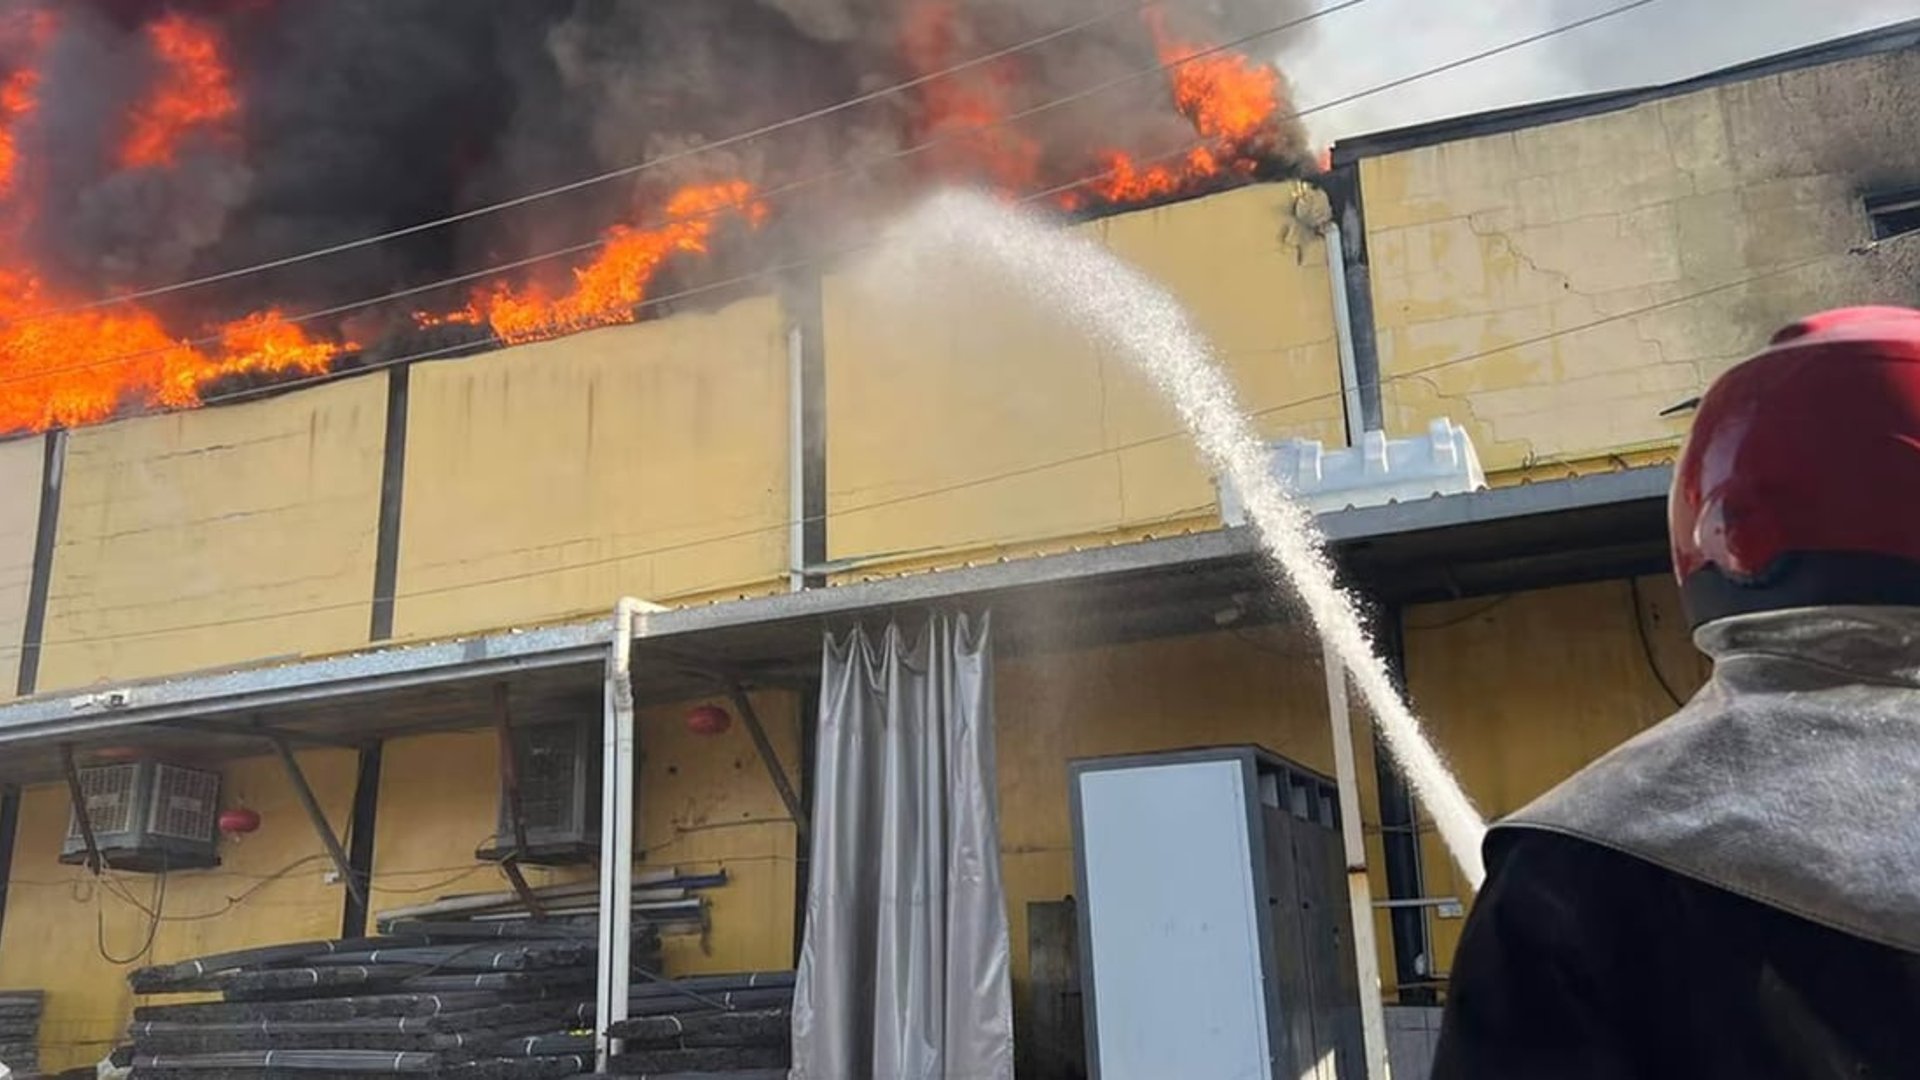 Erbil sees rise in firerelated incidents since start of 